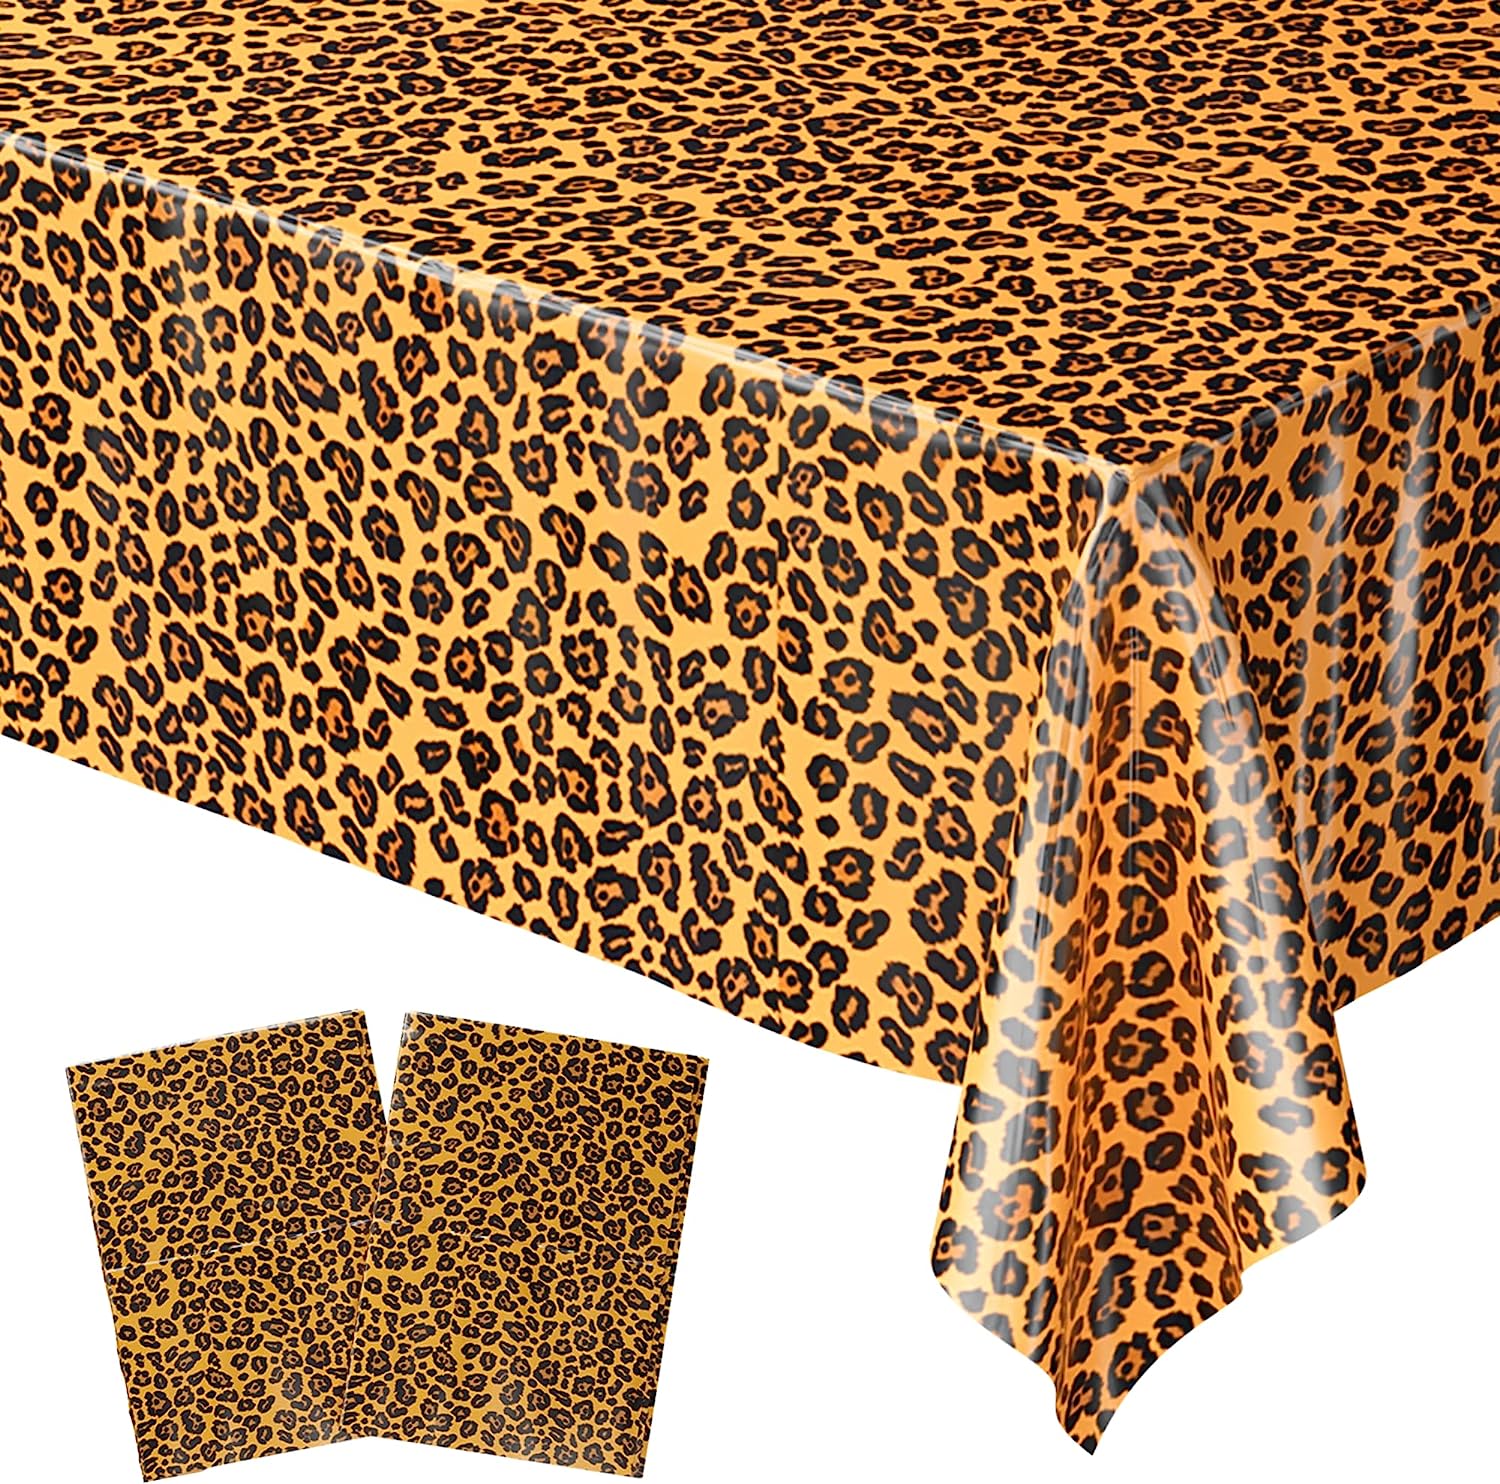 These realistic Leopard Table covers are the perfect addition to your safari, cheetah, jungle animal, or African savanah birthday party or other celebration!